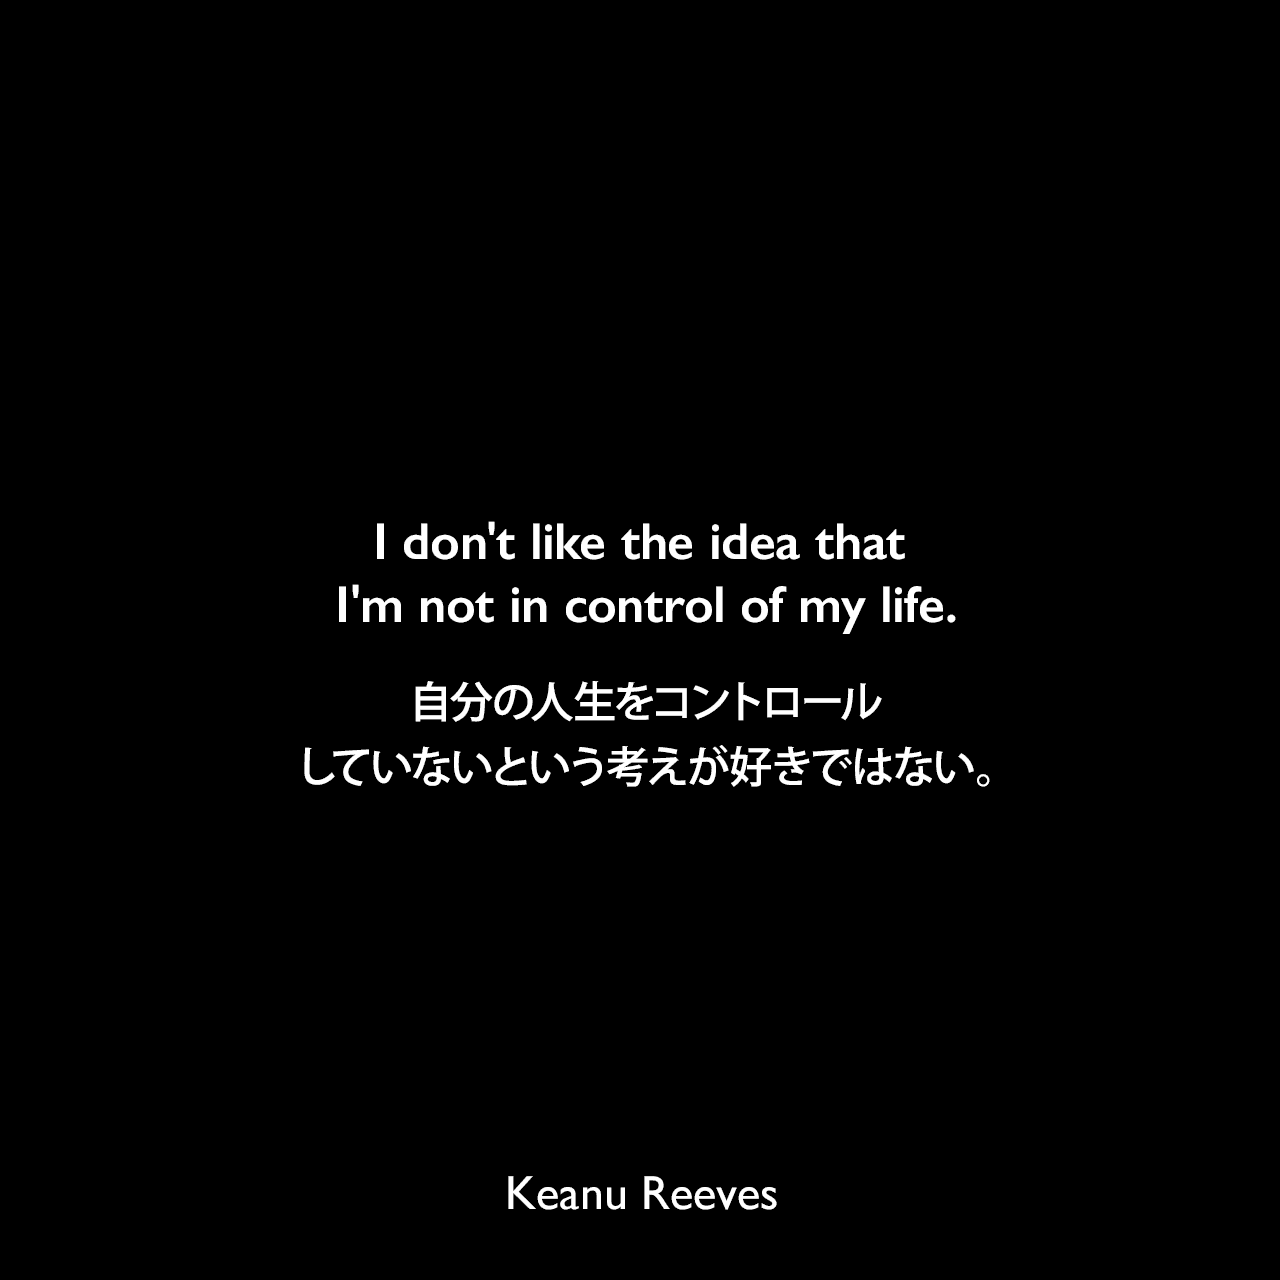 I don't like the idea that I'm not in control of my life.自分の人生をコントロールしていないという考えが好きではない。- 1999年映画マトリックスのセリフよりKeanu Reeves